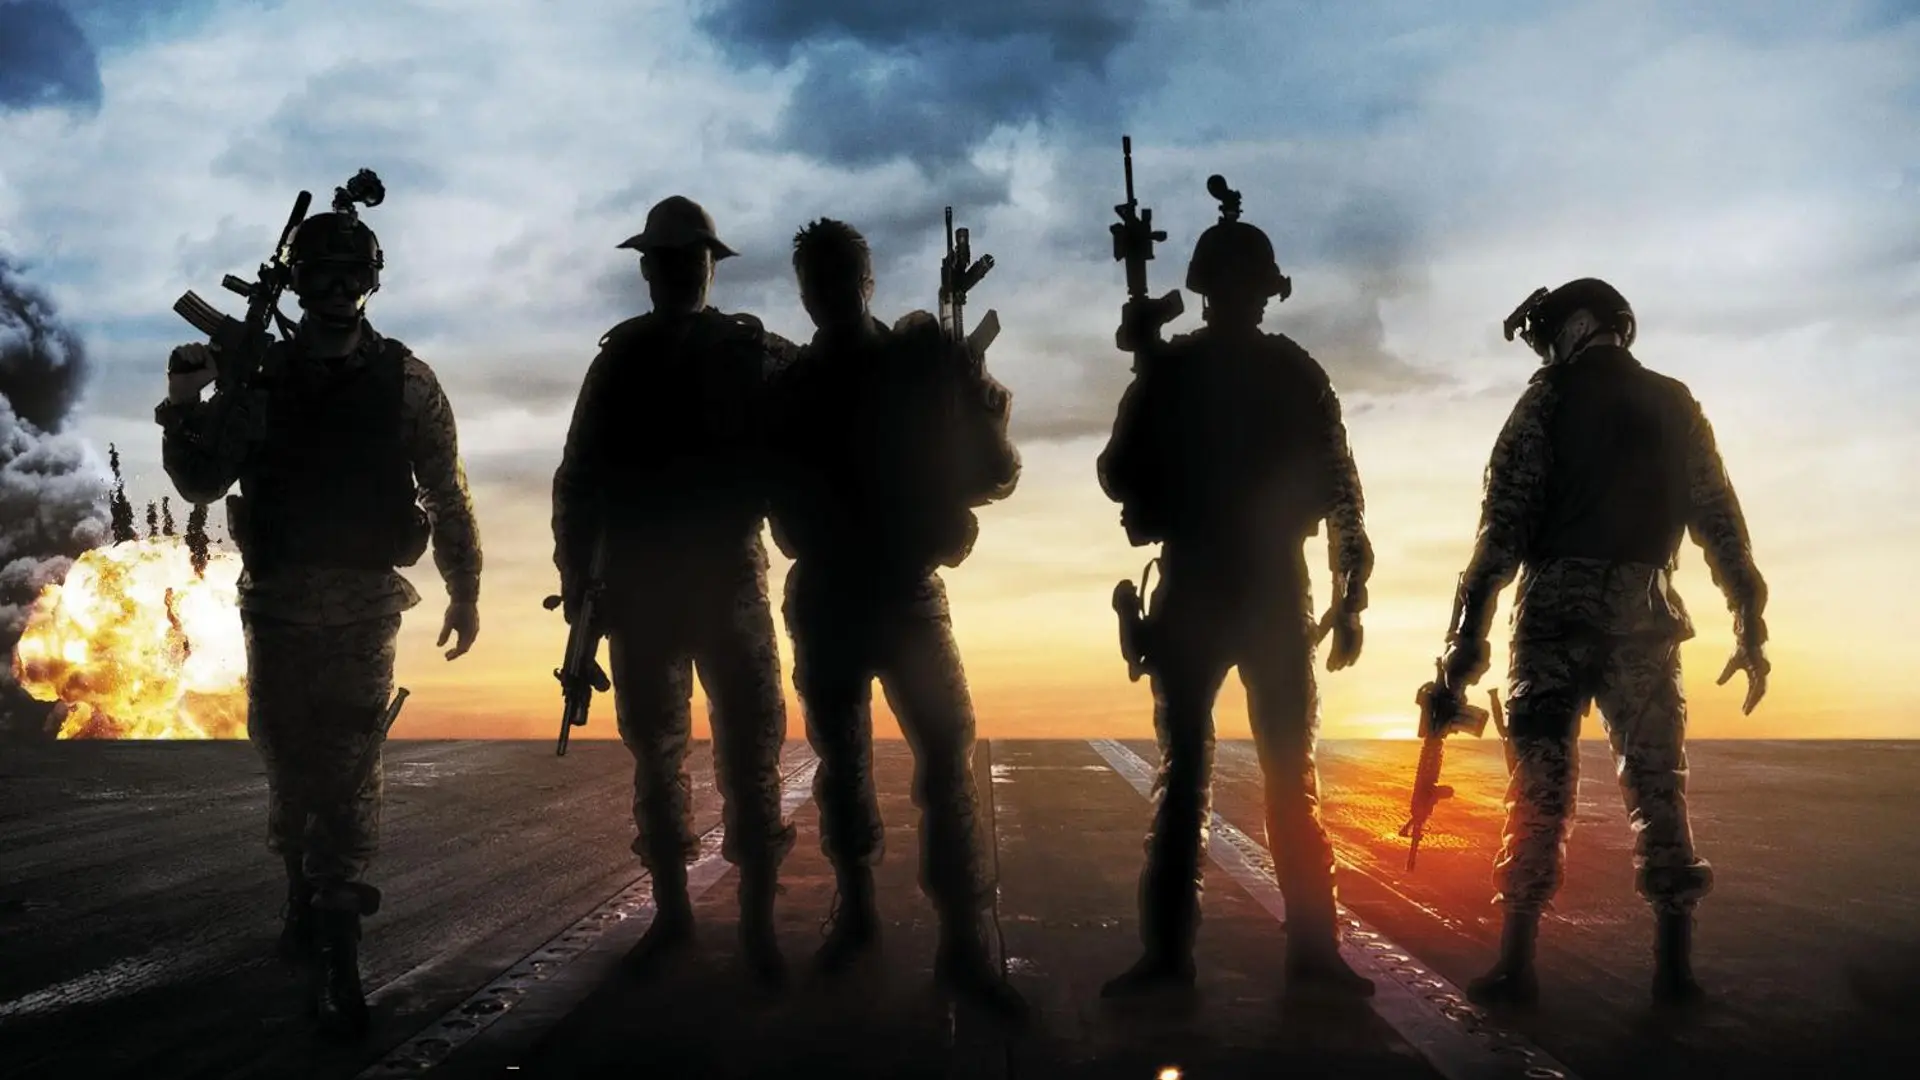 Movie Act of Valor wallpaper 1 | Background Image